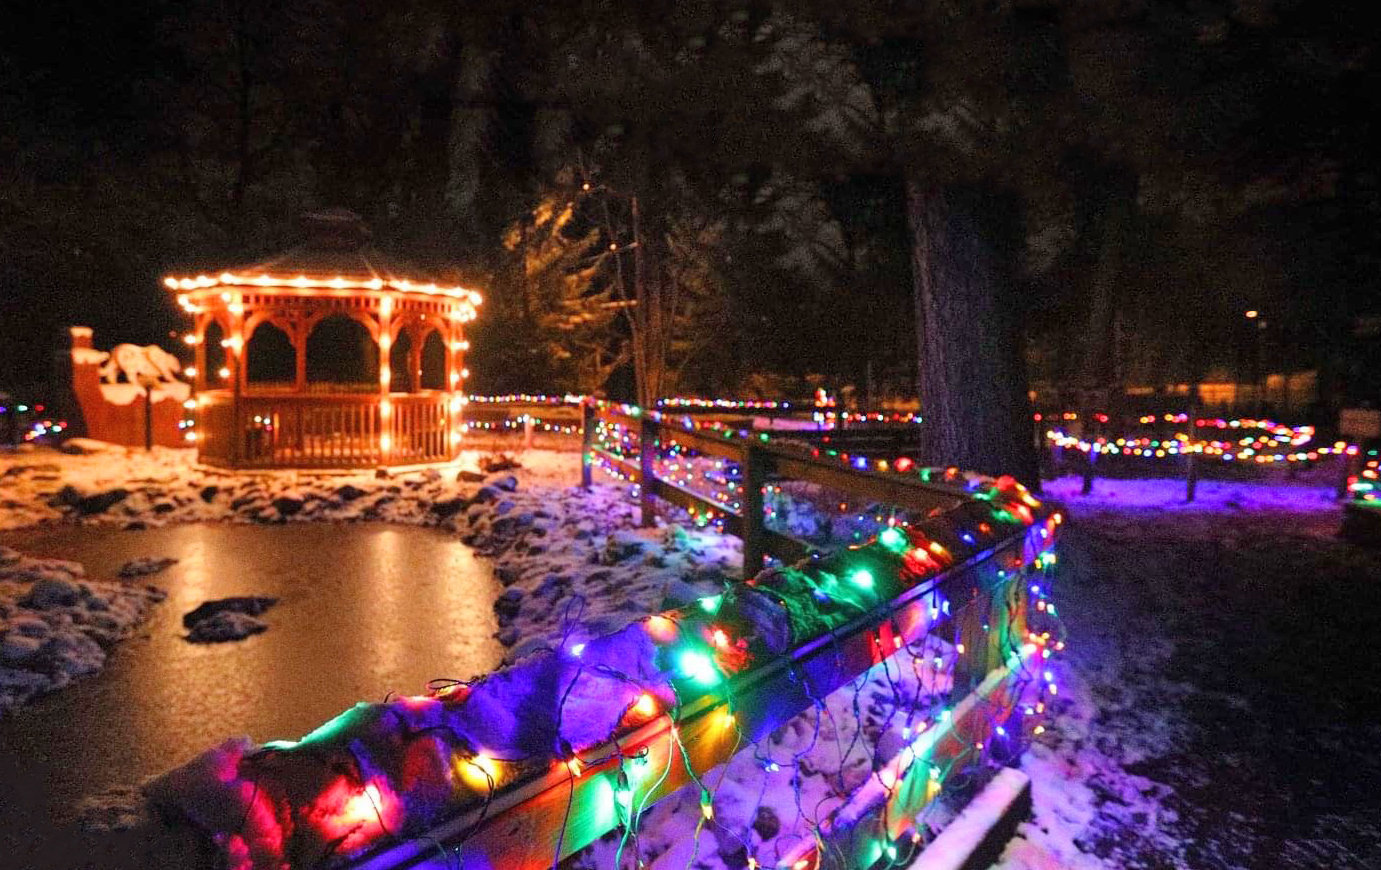 Potter Park Zoo's Wonderland of Lights is a can't-miss attraction to get Lansing residents in the holiday spirit.